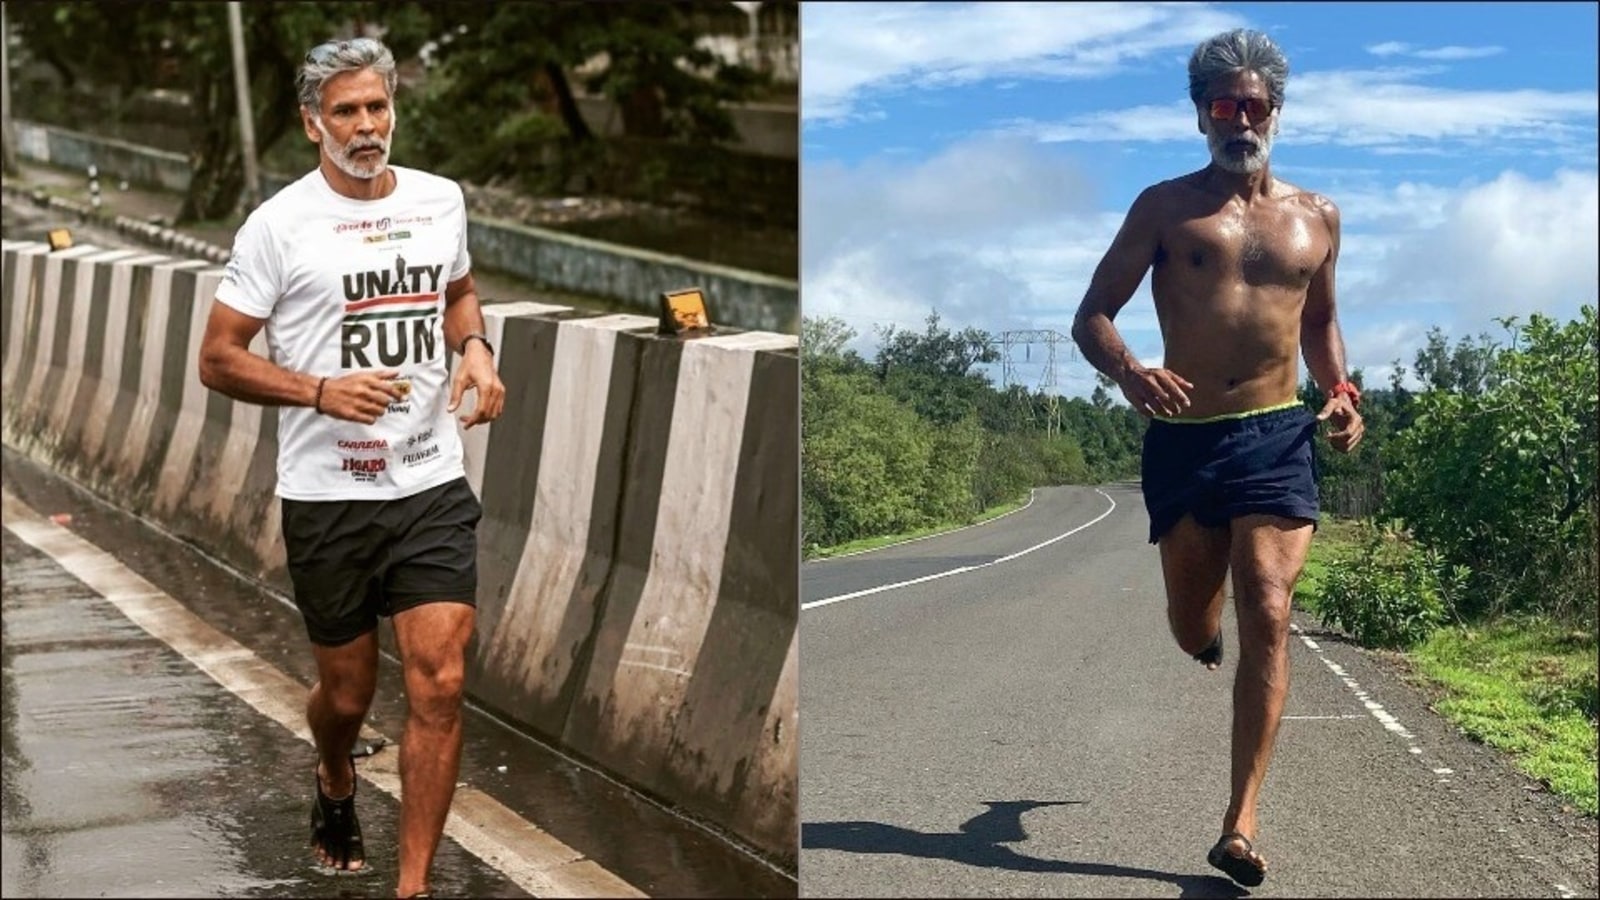 Milind Soman spills the beans on managing to stay so fit at 55